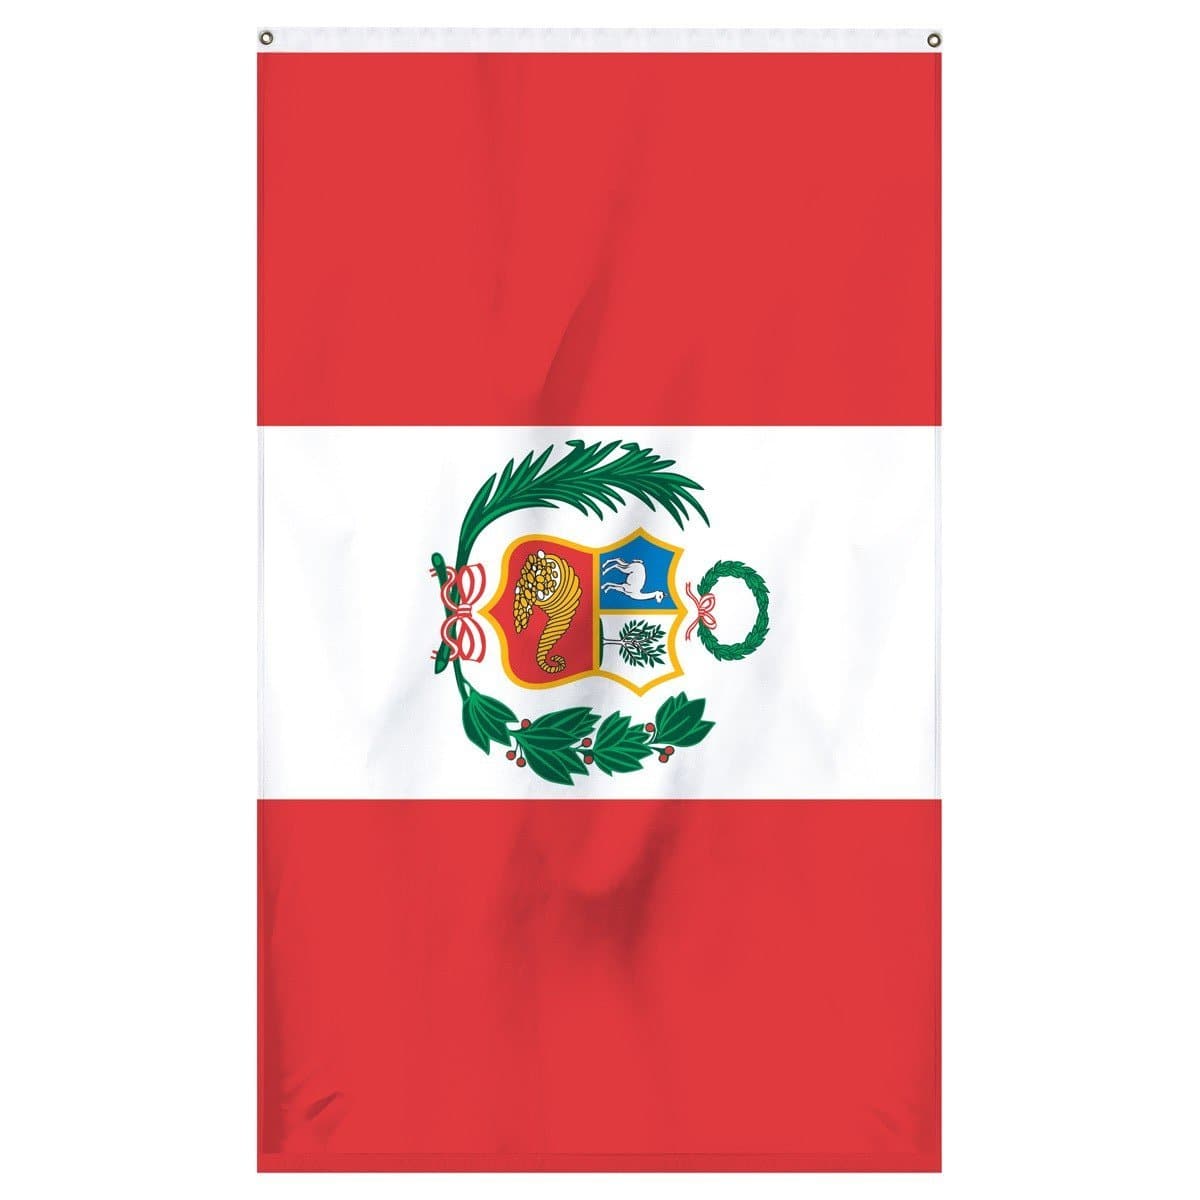 Peru National flag for sale to buy online from Atlantic Flag and Pole